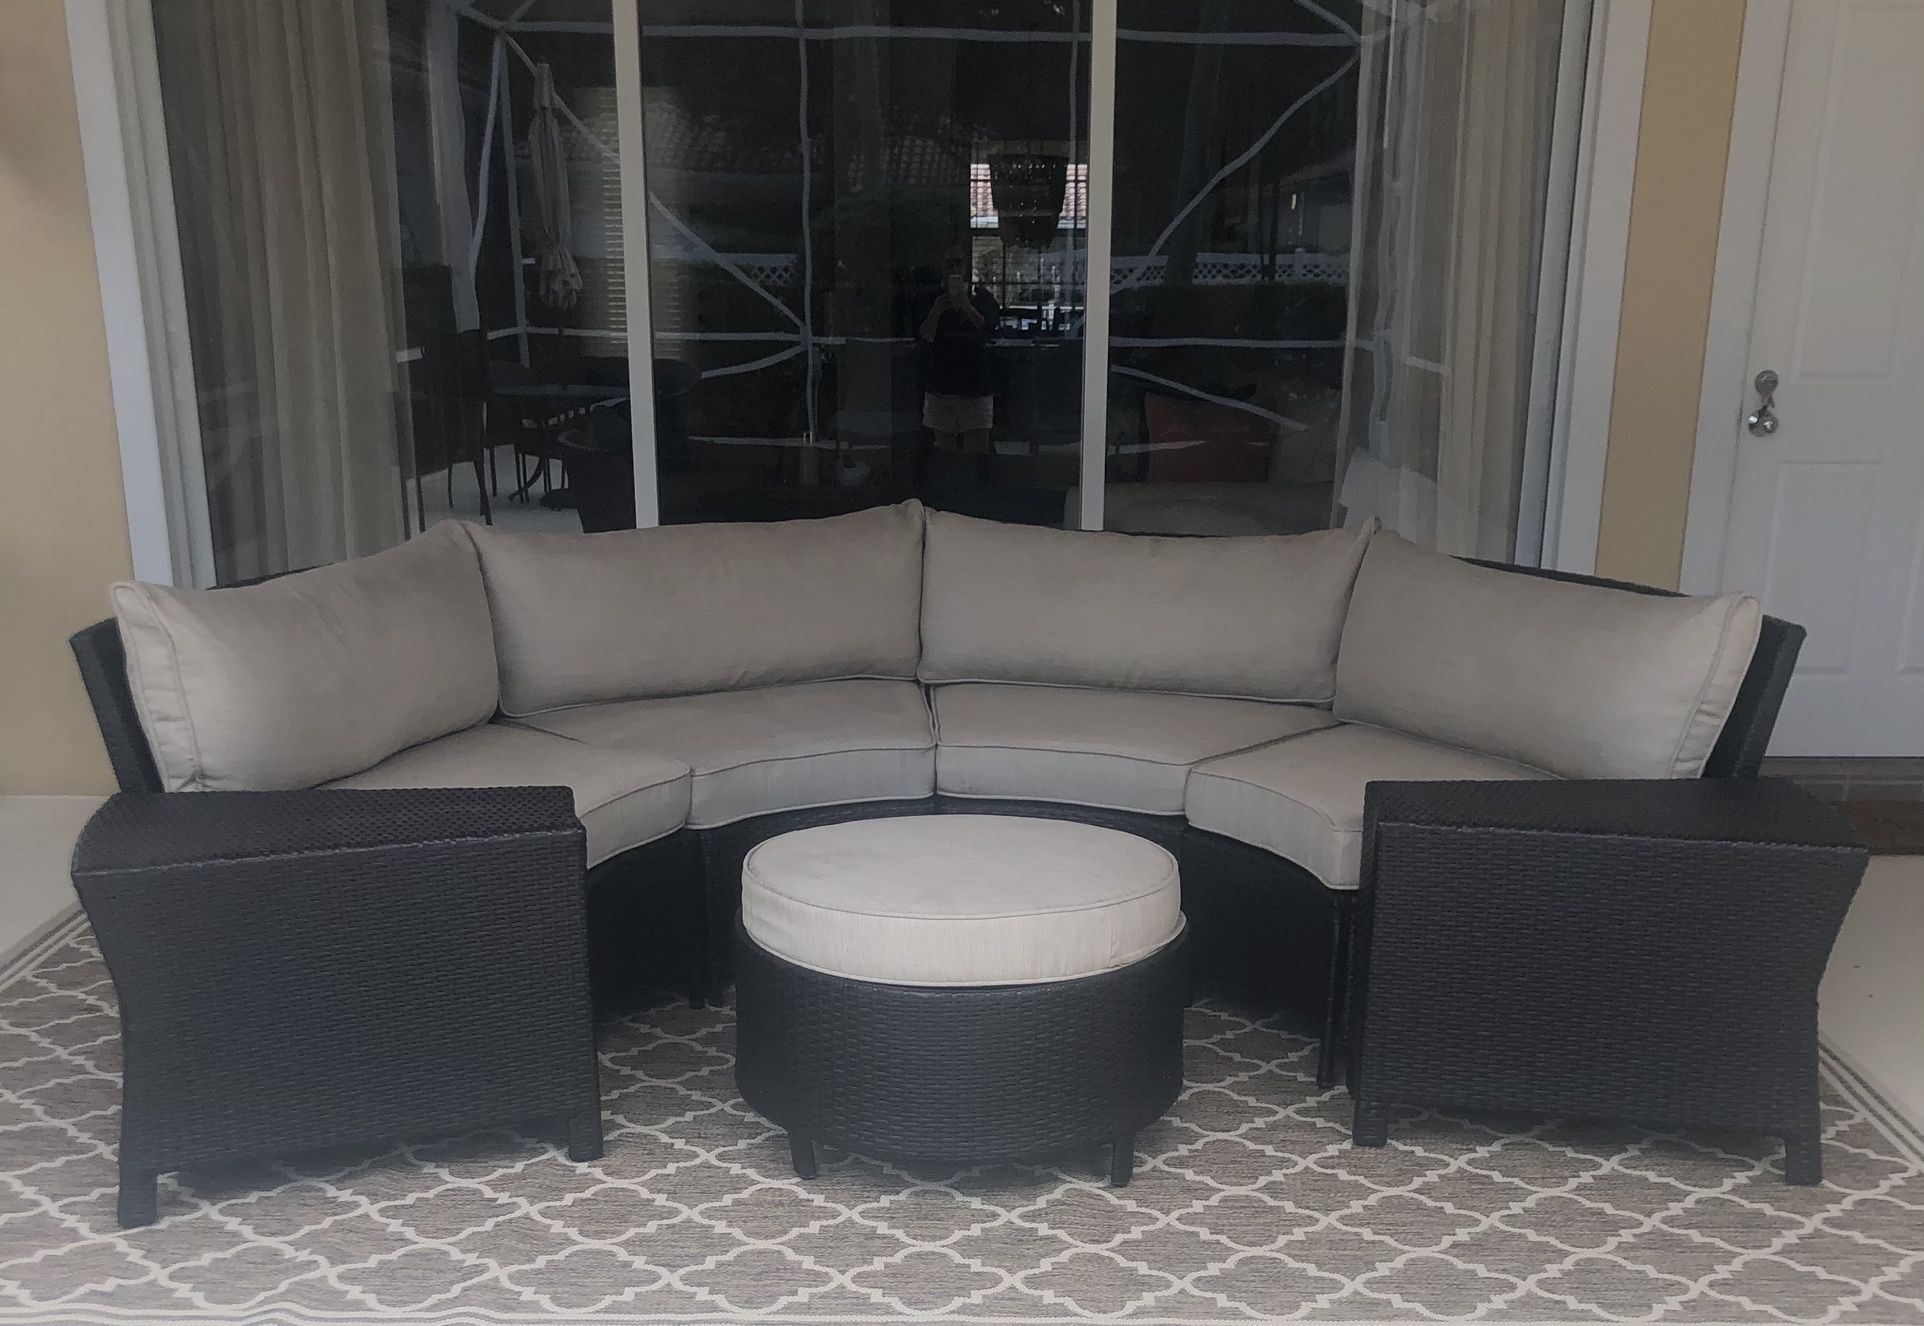 Dark Brown Wicker Outdoor Couch Sectional and Round Ottoman  with Beige Cushions - MAKE OFFER!